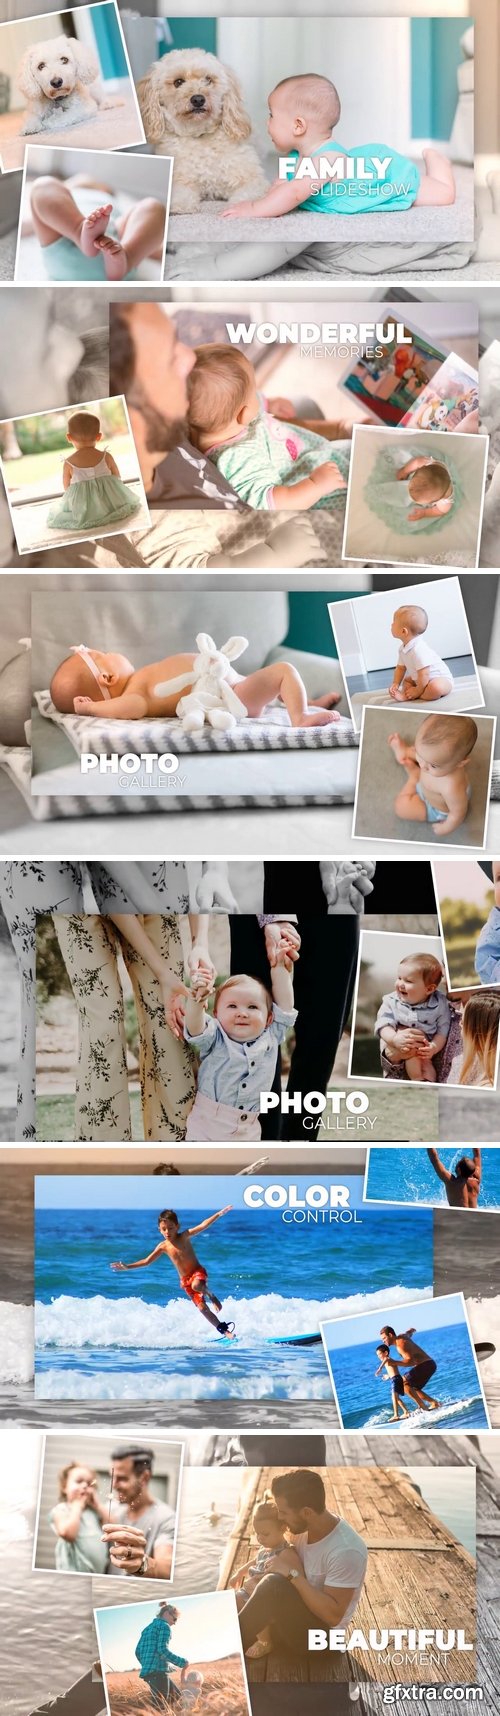 MA - Family Slideshow After Effects Templates 150858